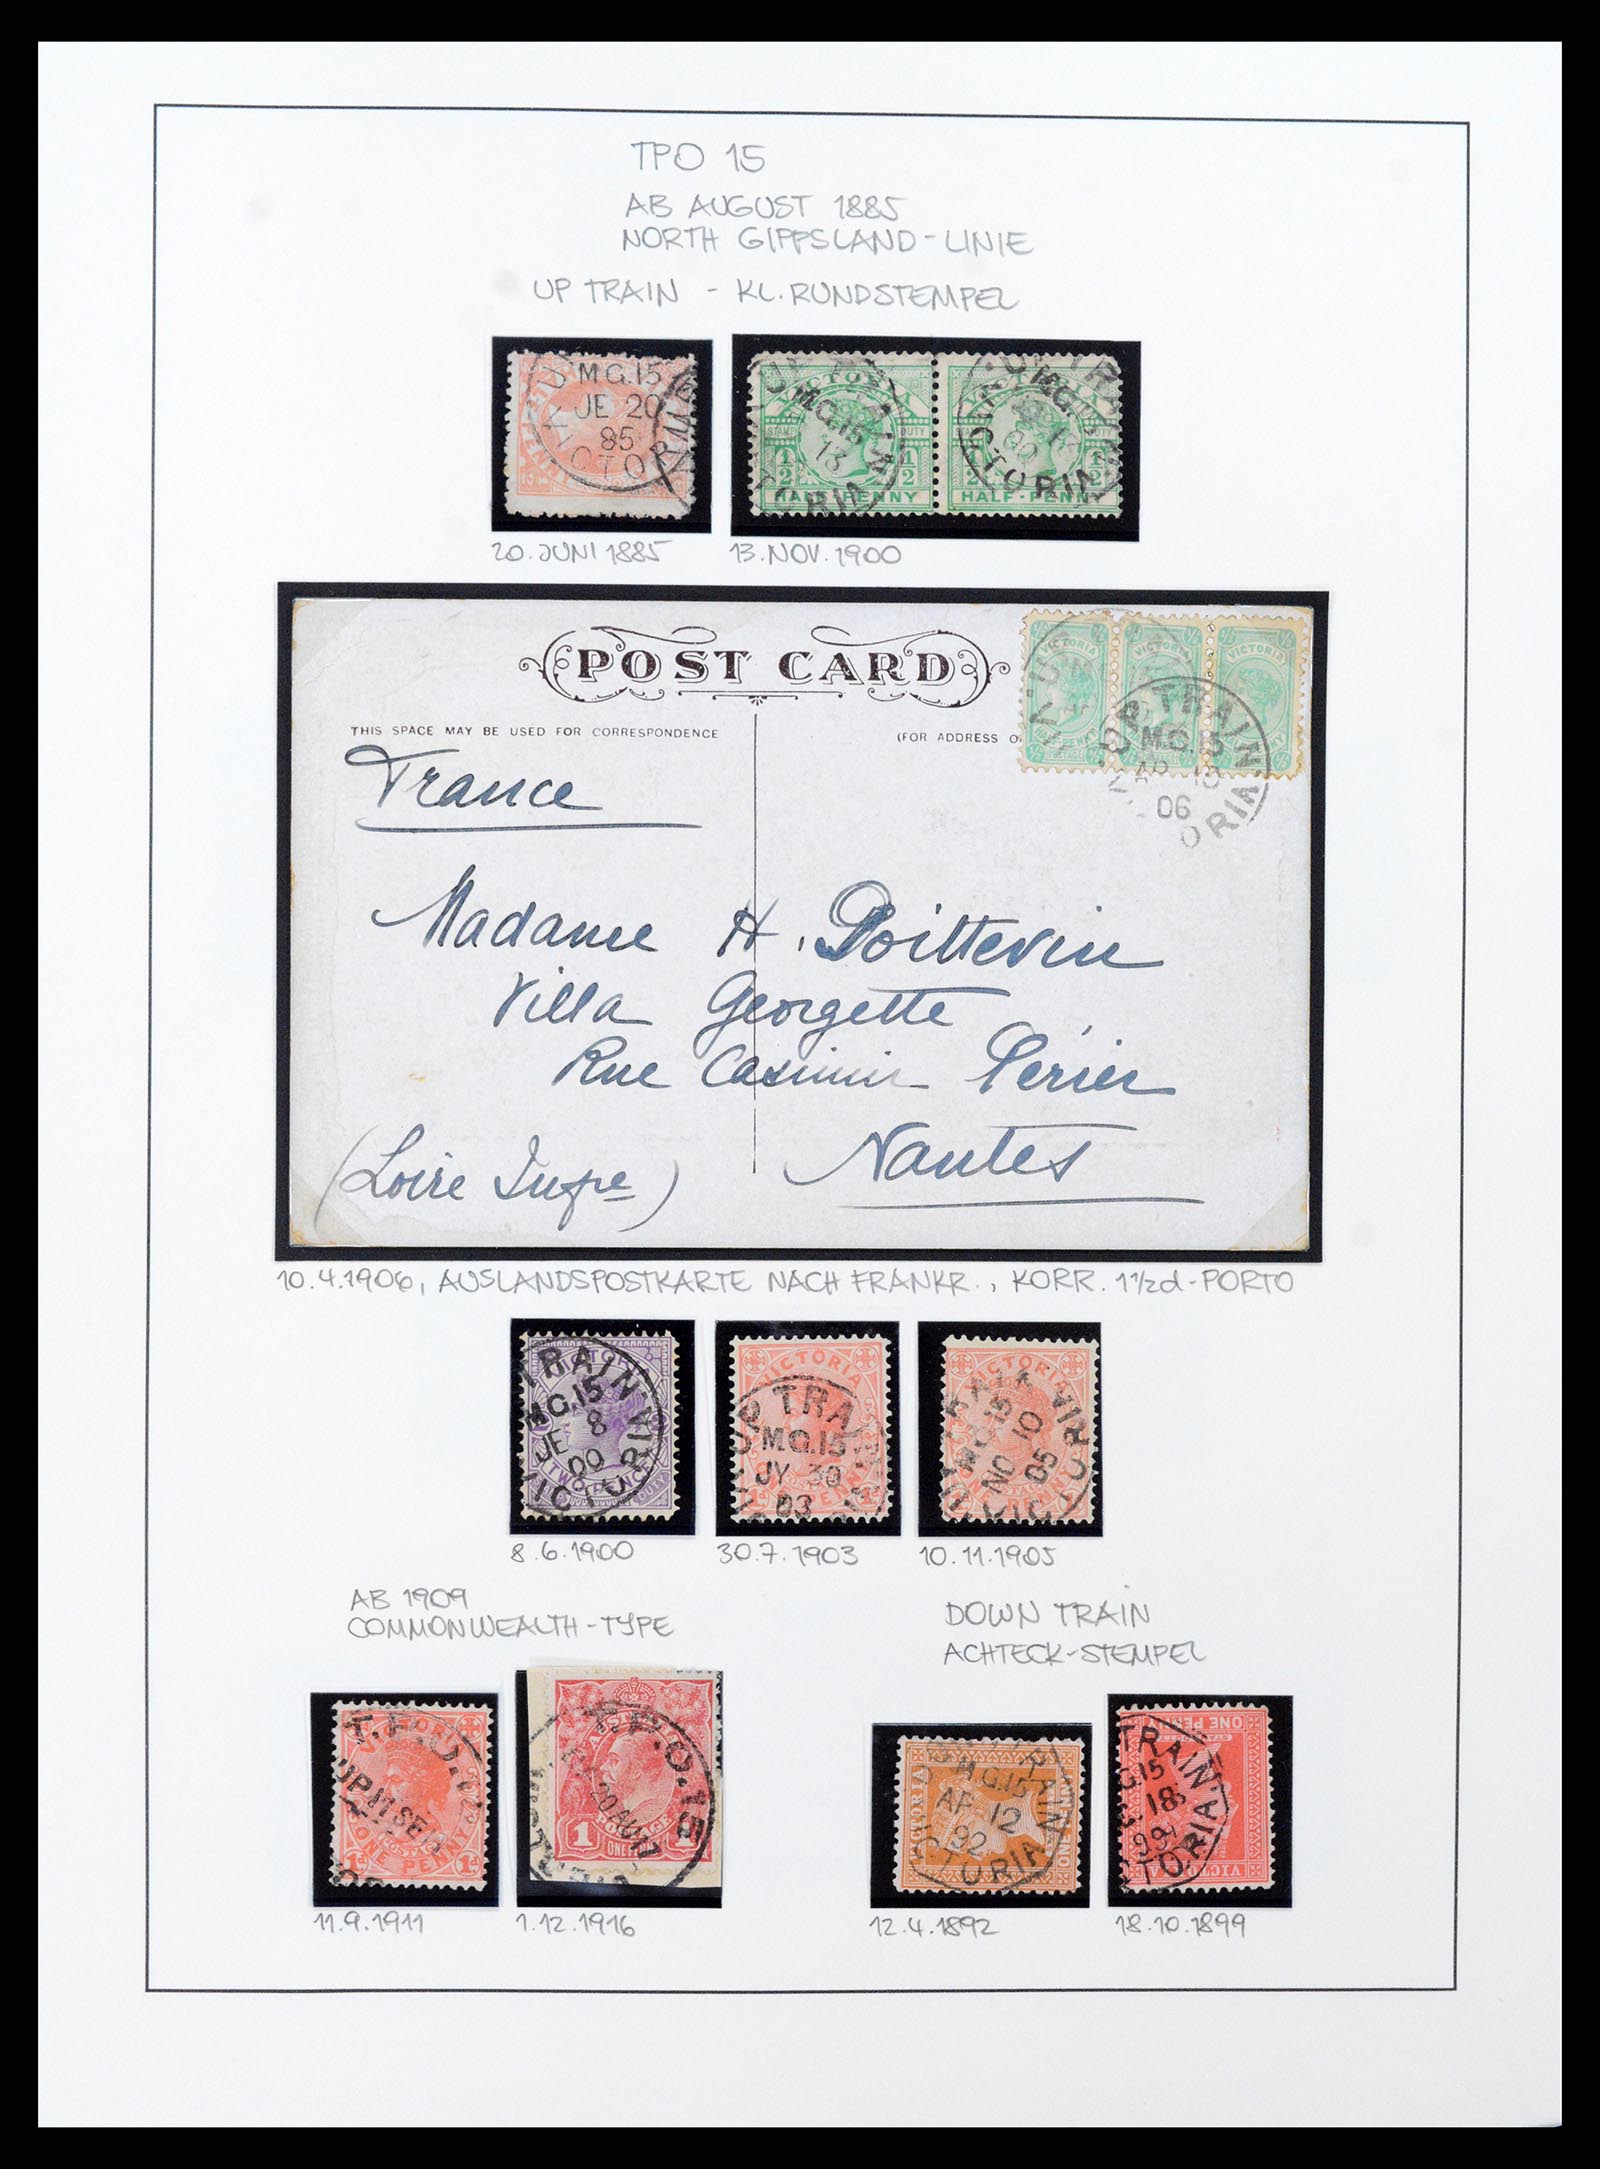 37514 021 - Stamp collection 37514 Victoria tpo cancellations 1865-1930.